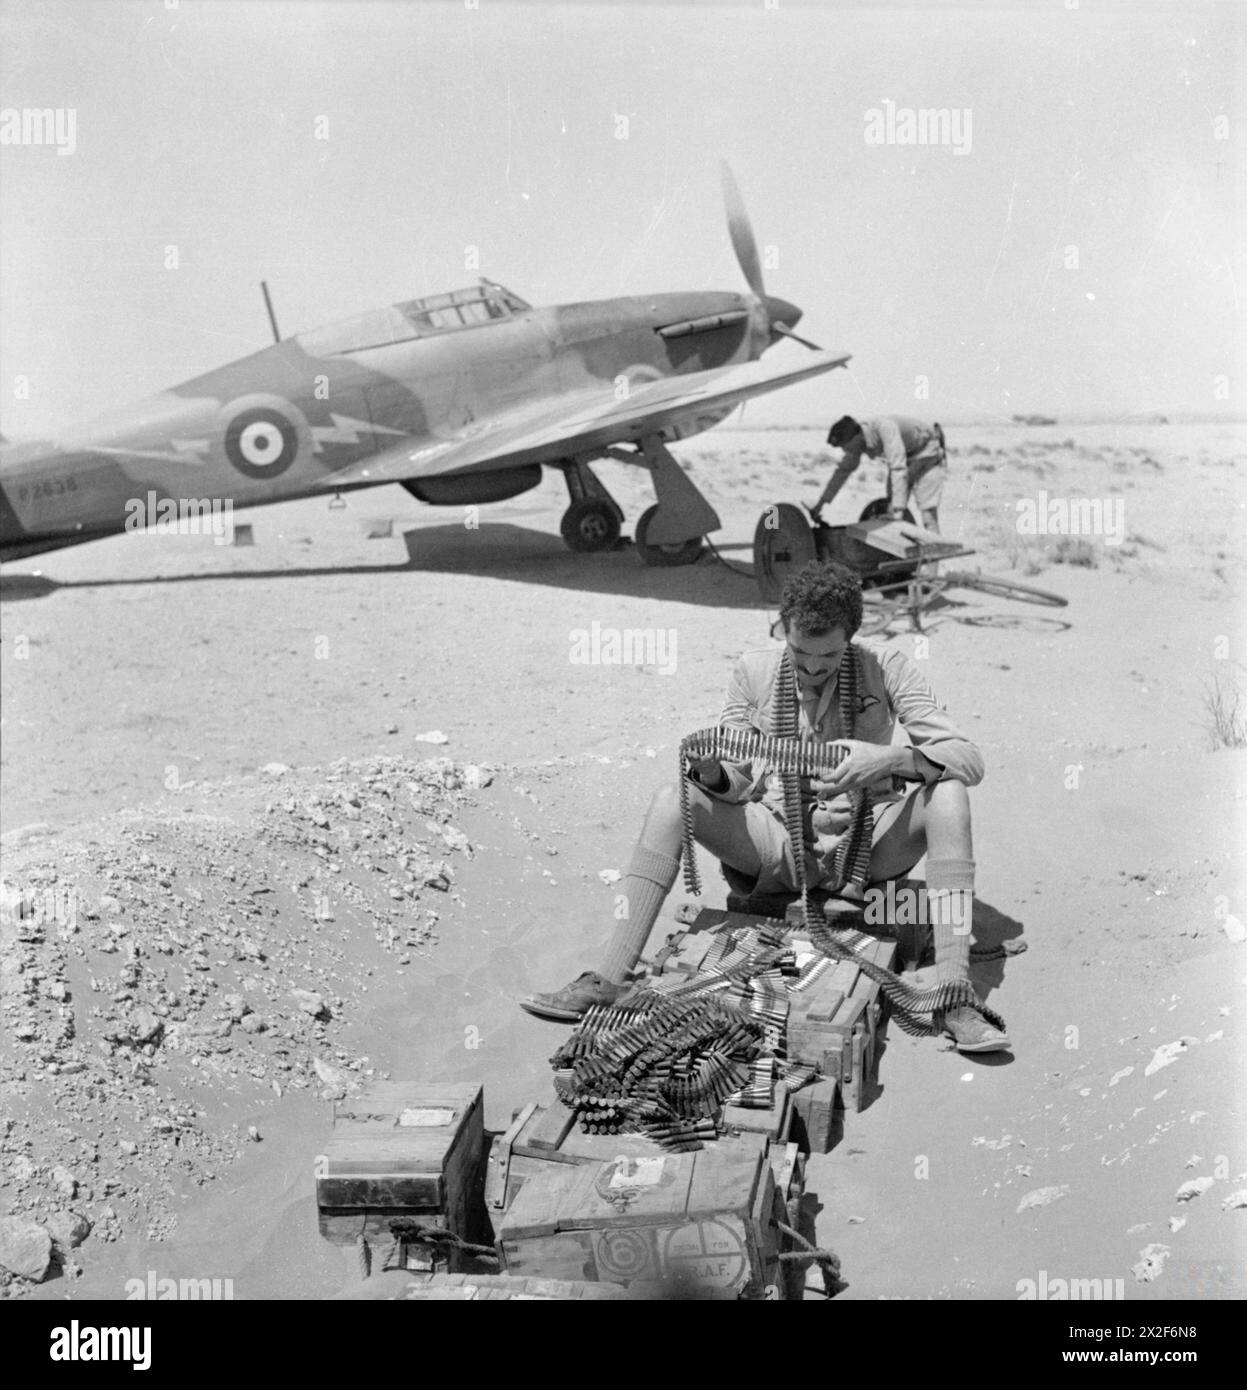 ROYAL AIR FORCE OPERATIONS IN THE MIDDLE EAST AND NORTH AFRICA, 1939-1943. - Sergeant Pilot F H Dean of No. 274 Squadron RAF examines belts of .303 ammunition before they are installed in his aircraft at Sidi Barrani, Egypt. In the background, one of the groundcrew attaches a trolley-accumulator to Hawker Hurricane Mark I, P2638, sporting the yellow lightning flash emblem (later changed to blue) which became 274 Squadron's unofficial insignia at about this time. Sergeant Dean was shot down and killed on 15 May 1941, when his section of Hurricanes fought with Messerschmitt Bf 109s near Halfaya Stock Photo